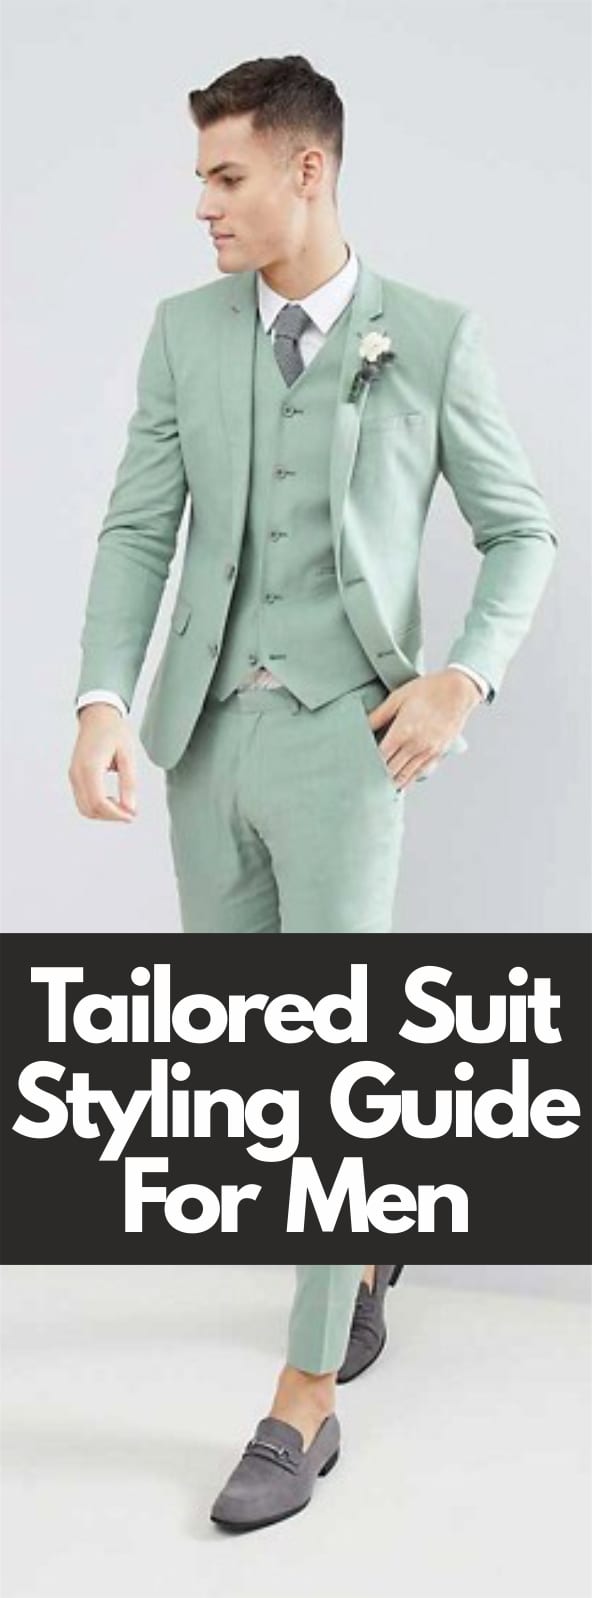 Tailored Suit Styling Guide For Men